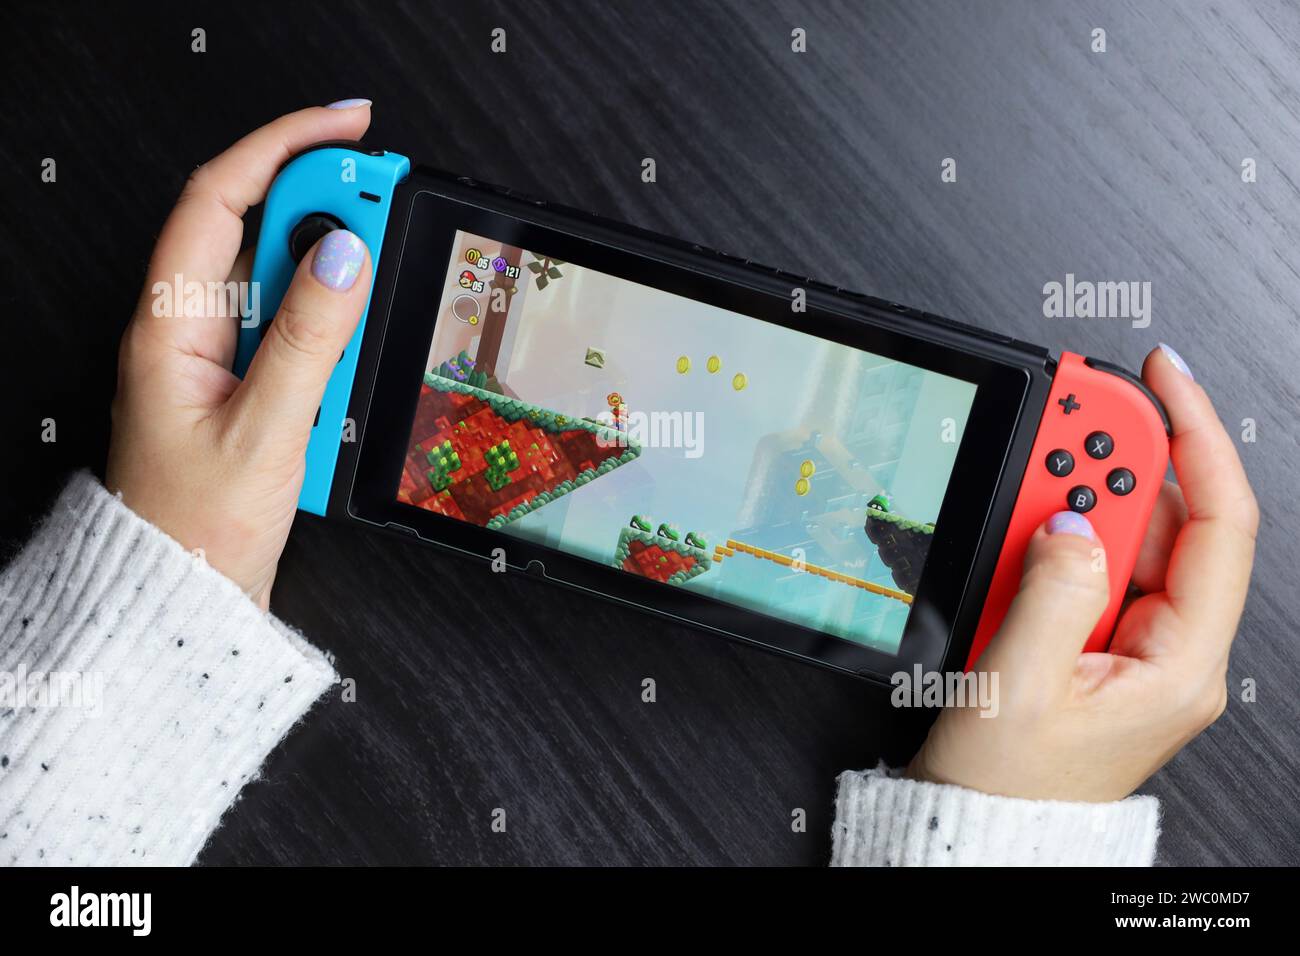 Girl playing Super Mario Bros. Wonder game on Nintendo Switch console in handheld mode Stock Photo